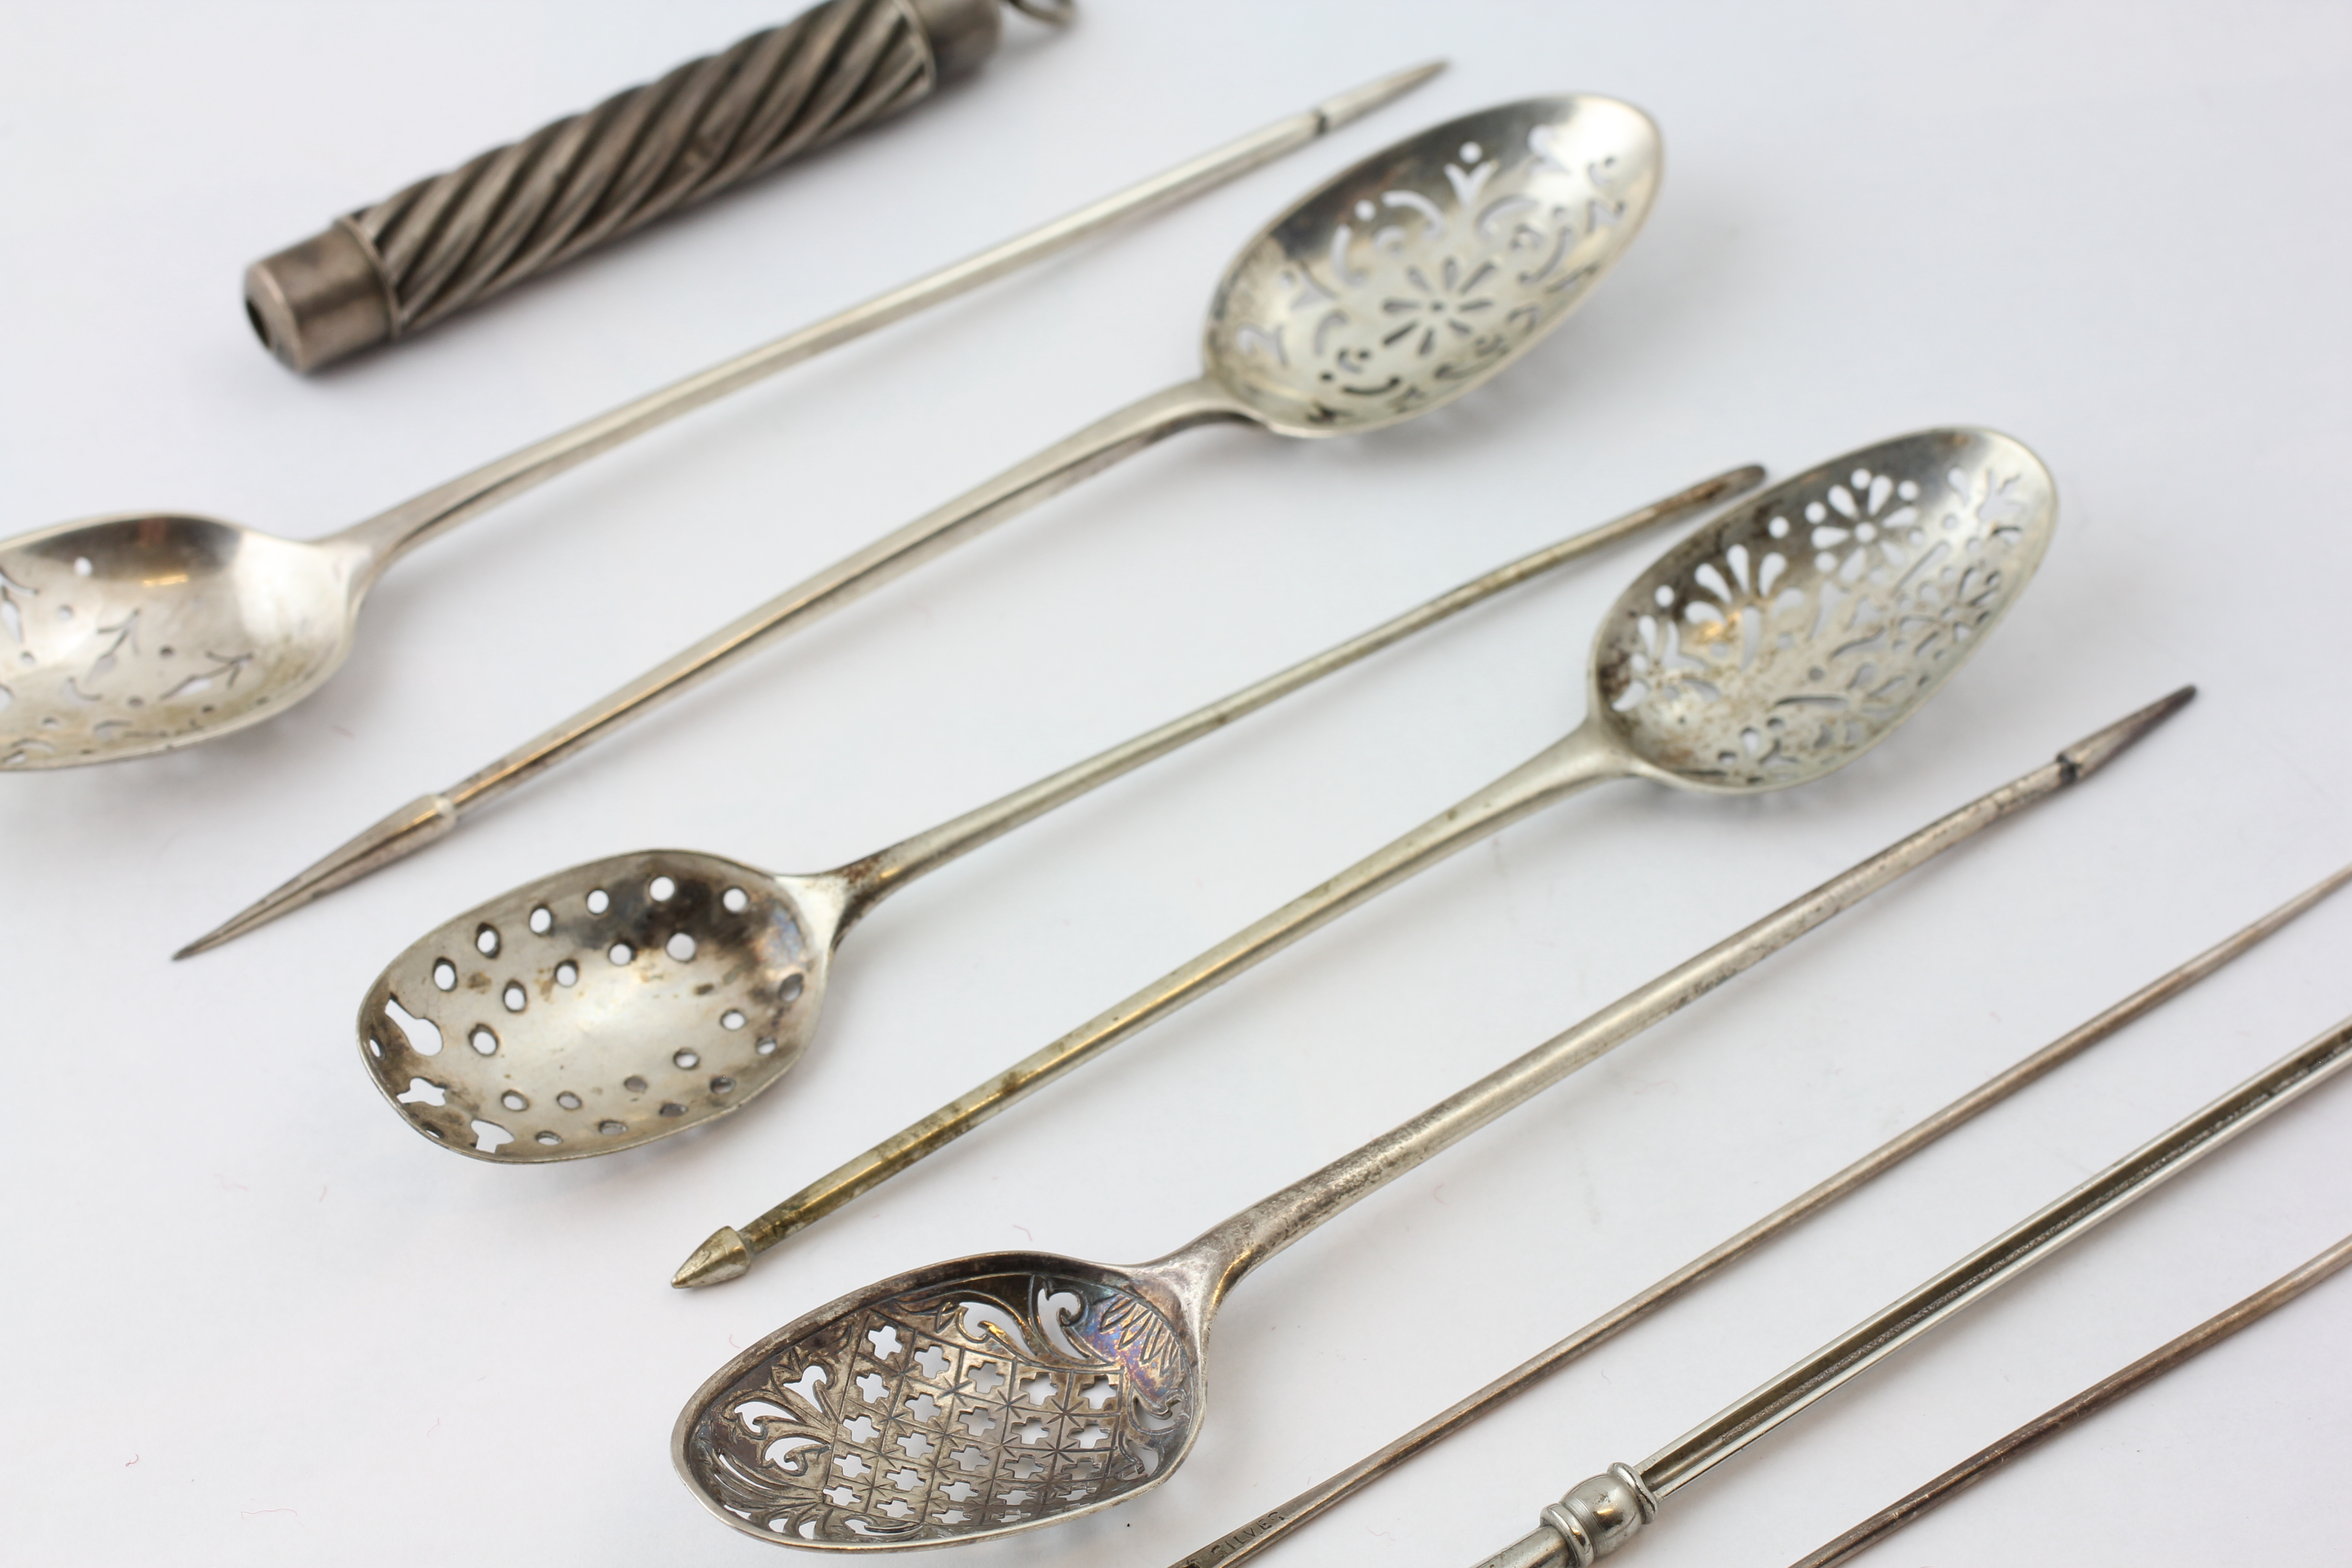 TWO SILVER MULBERRY/OLIVE SPOONS, LONDON 1799, THREE MULBERRY/OLIVE SPOONS, ONE EAR SCOOP, - Image 2 of 4